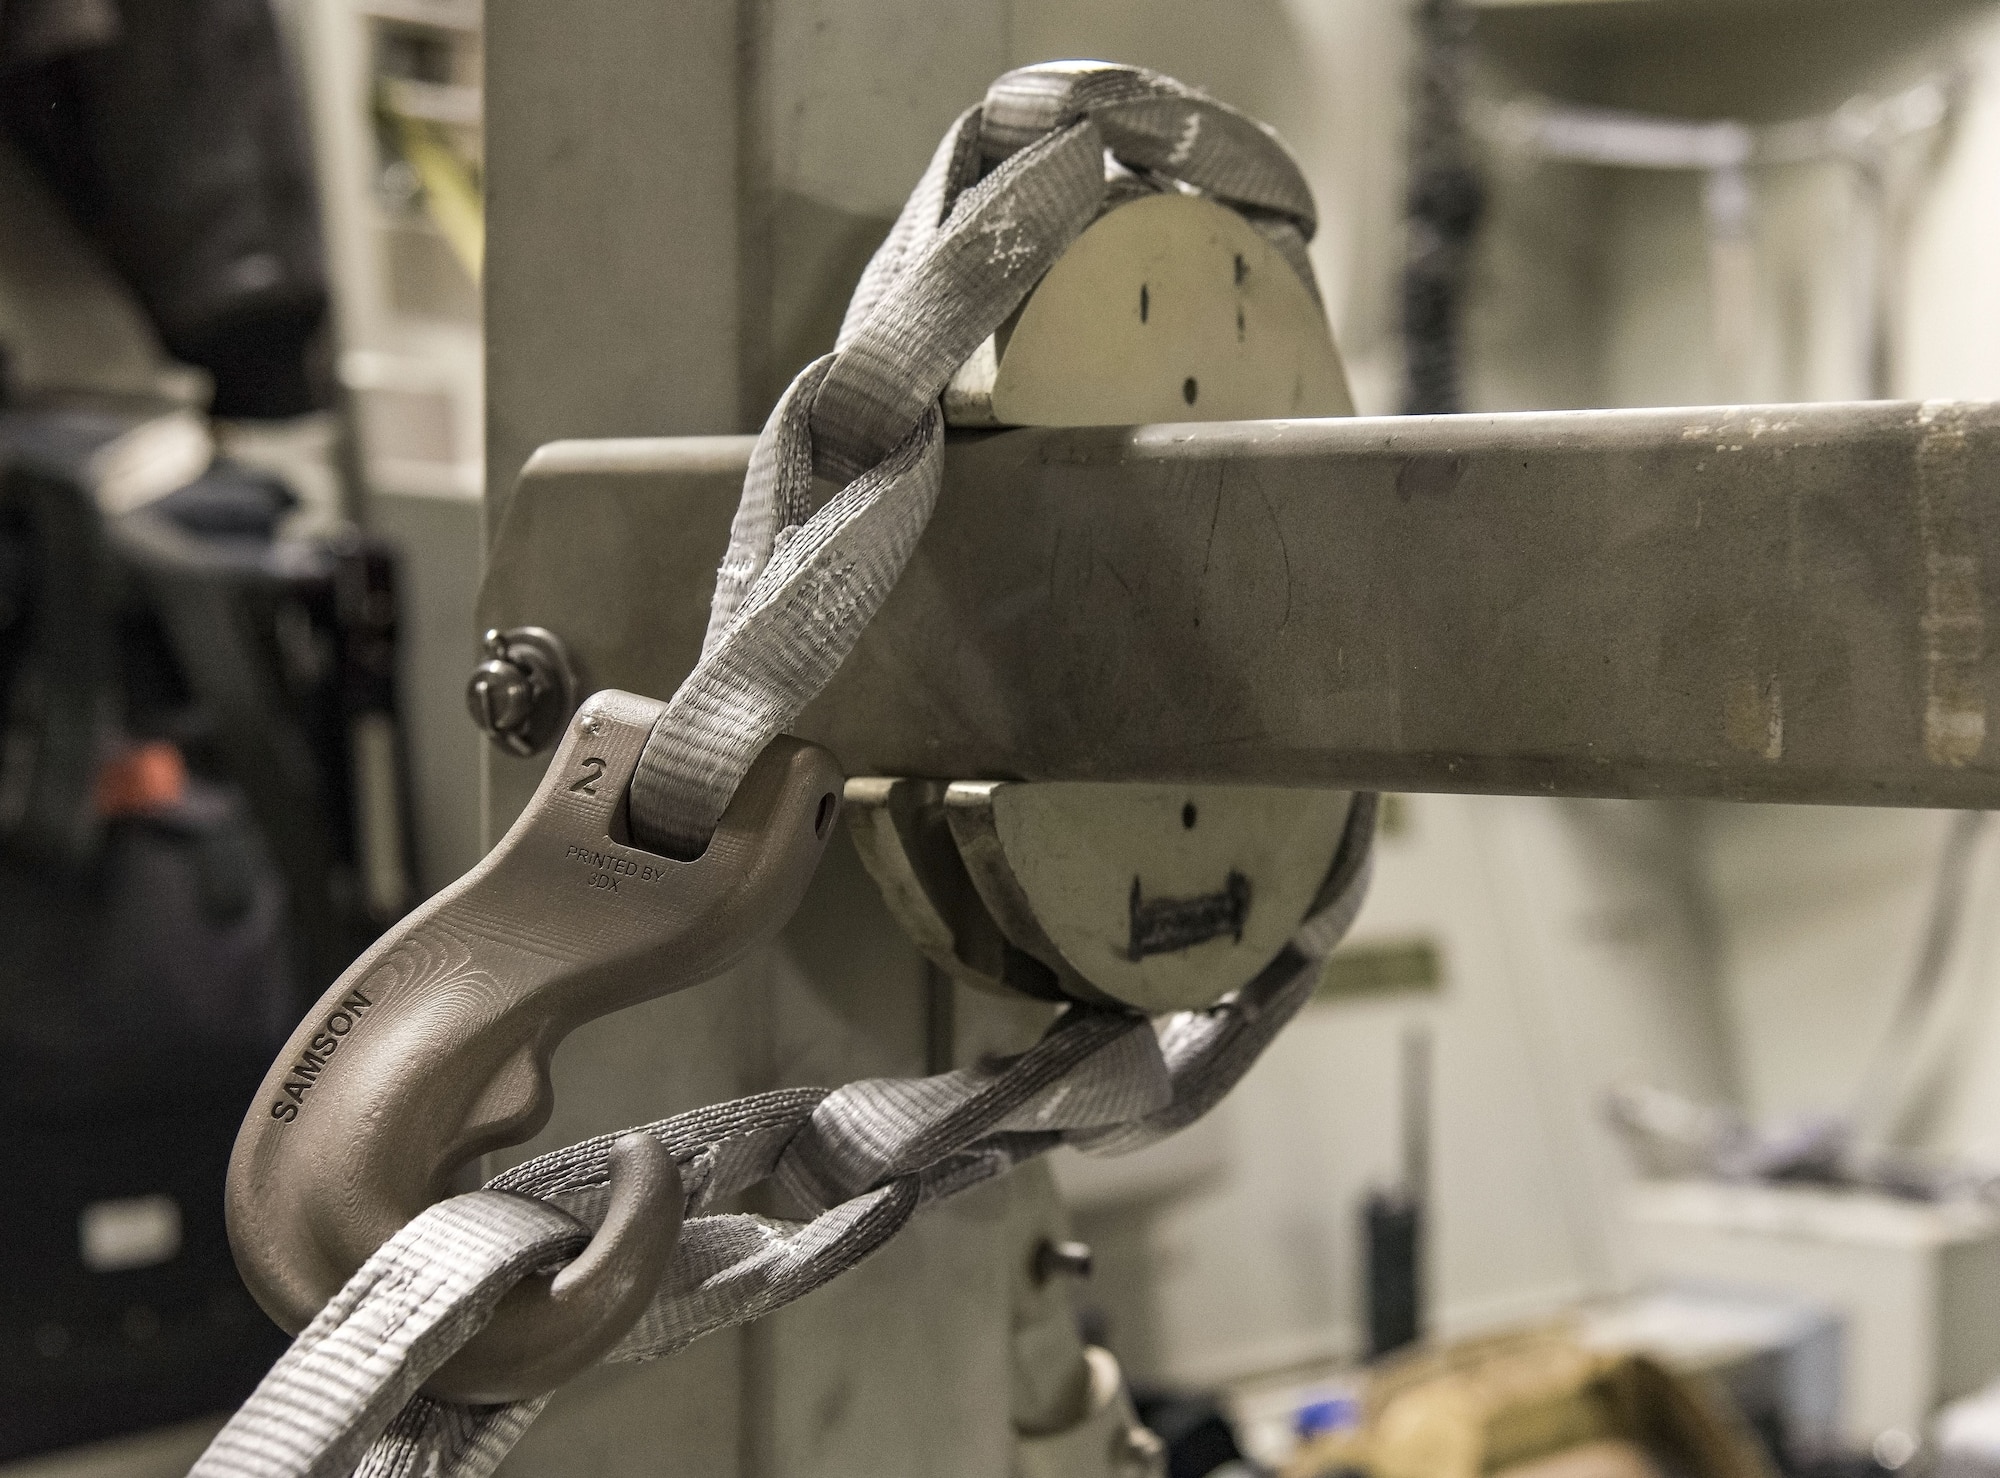 A synthetic tie-down chain rests in the slotted interface designed for steel chains used on a buffer stop assembly, Jan. 30, 2018 at Dover Air Force Base, Del. The buffer stop assembly is a device used during specific C-17 Globemaster III airdrop missions to keep pallets from shifting forward in the cargo compartment. (U.S. Air Force photo by Roland Balik)